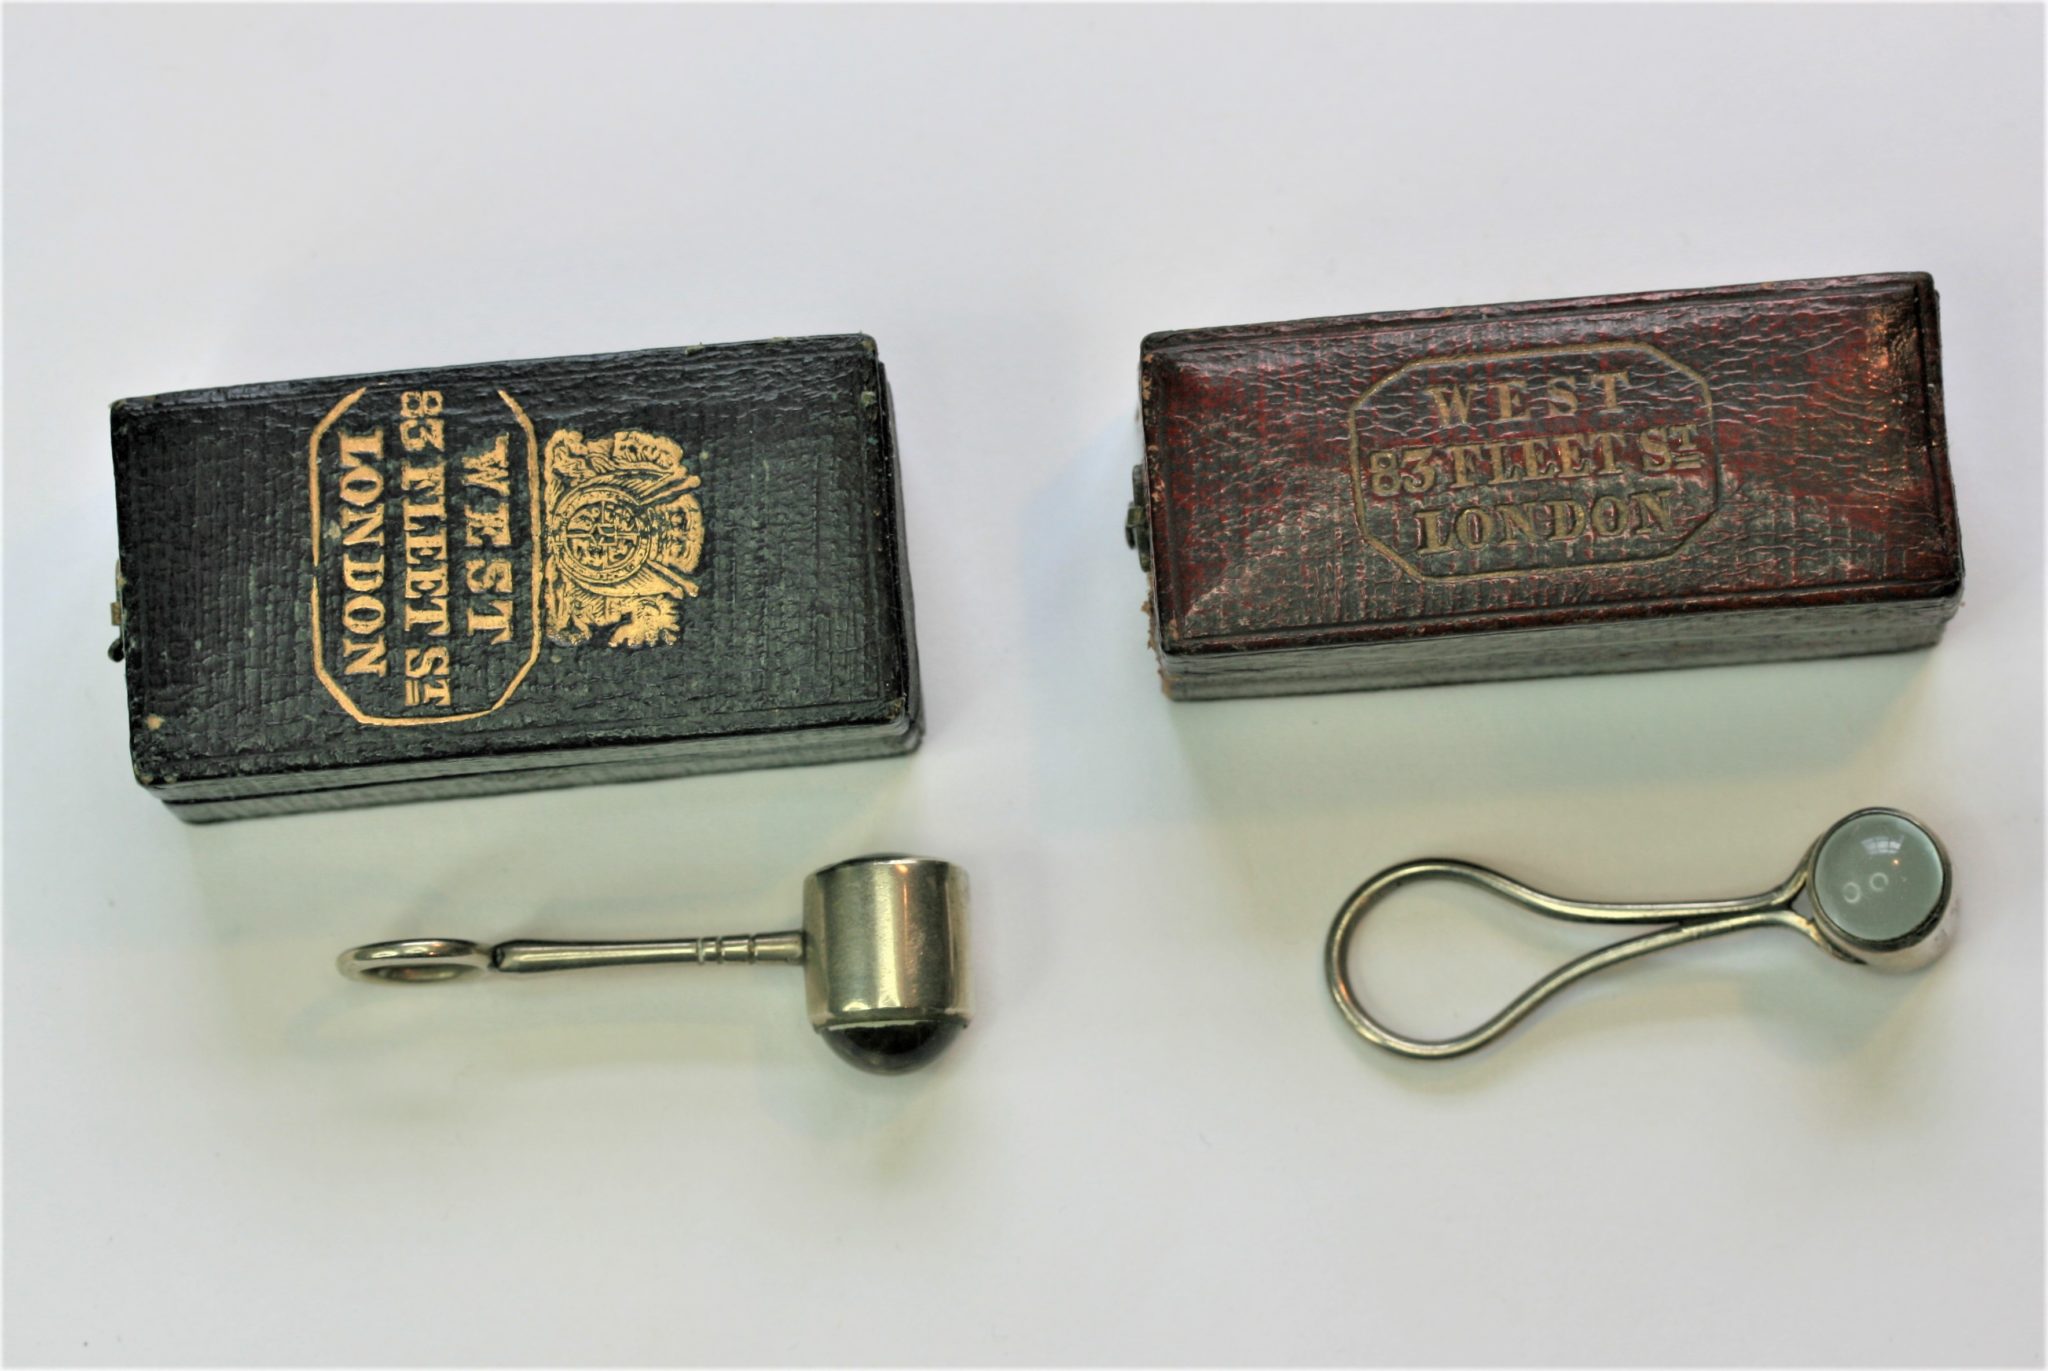 2 x STANHOPE by WEST SIMPLE MICROSCOPE MAGNIFYING GLASS ,C1830, BOXES AND STANHOPES ENGRAVED